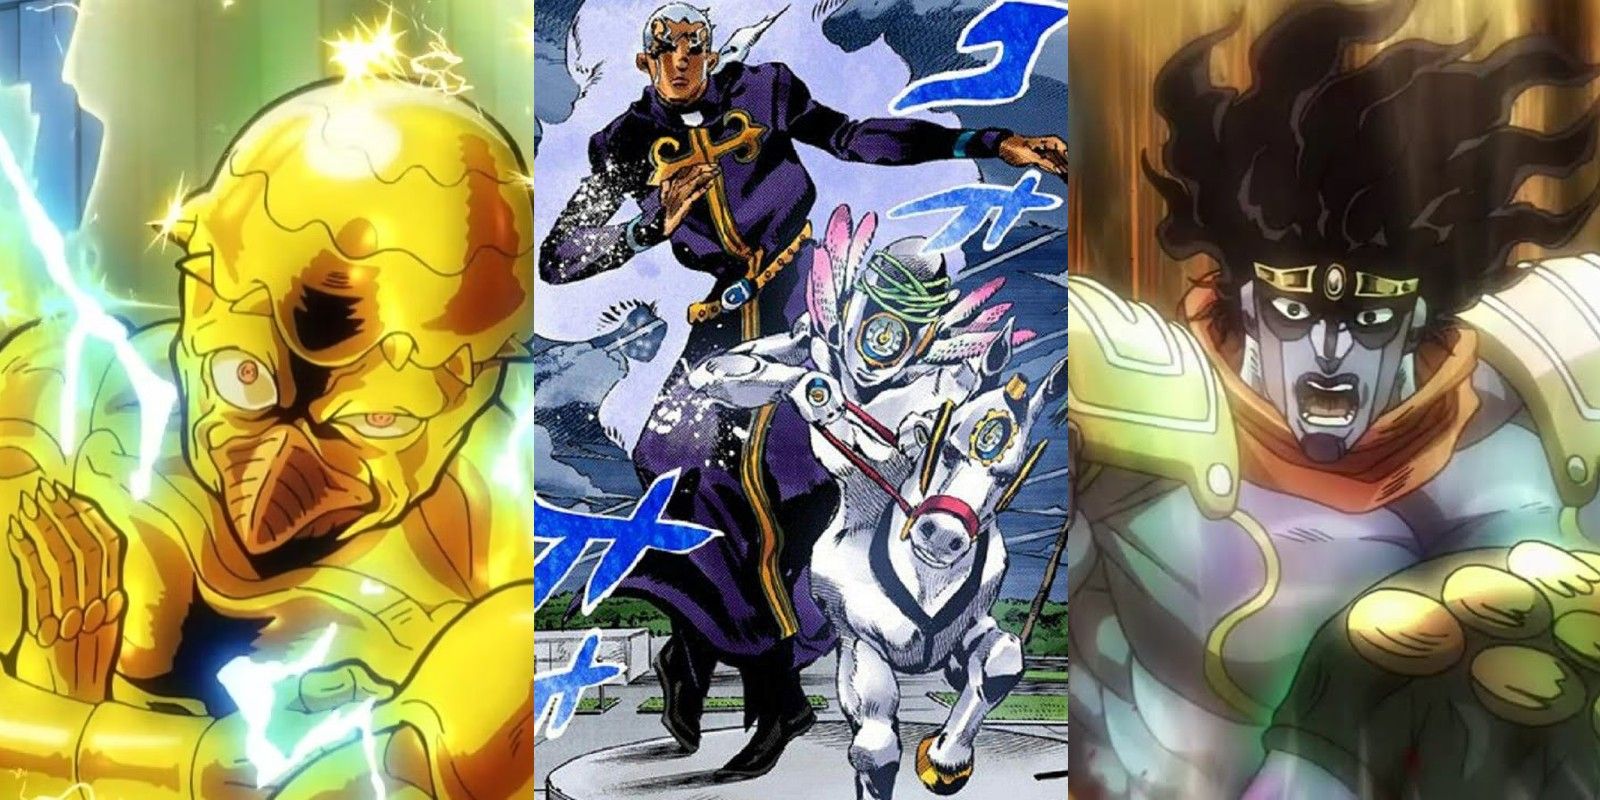 In JoJo's Bizarre Adventure, which stands can beat Made in Heaven? - Quora